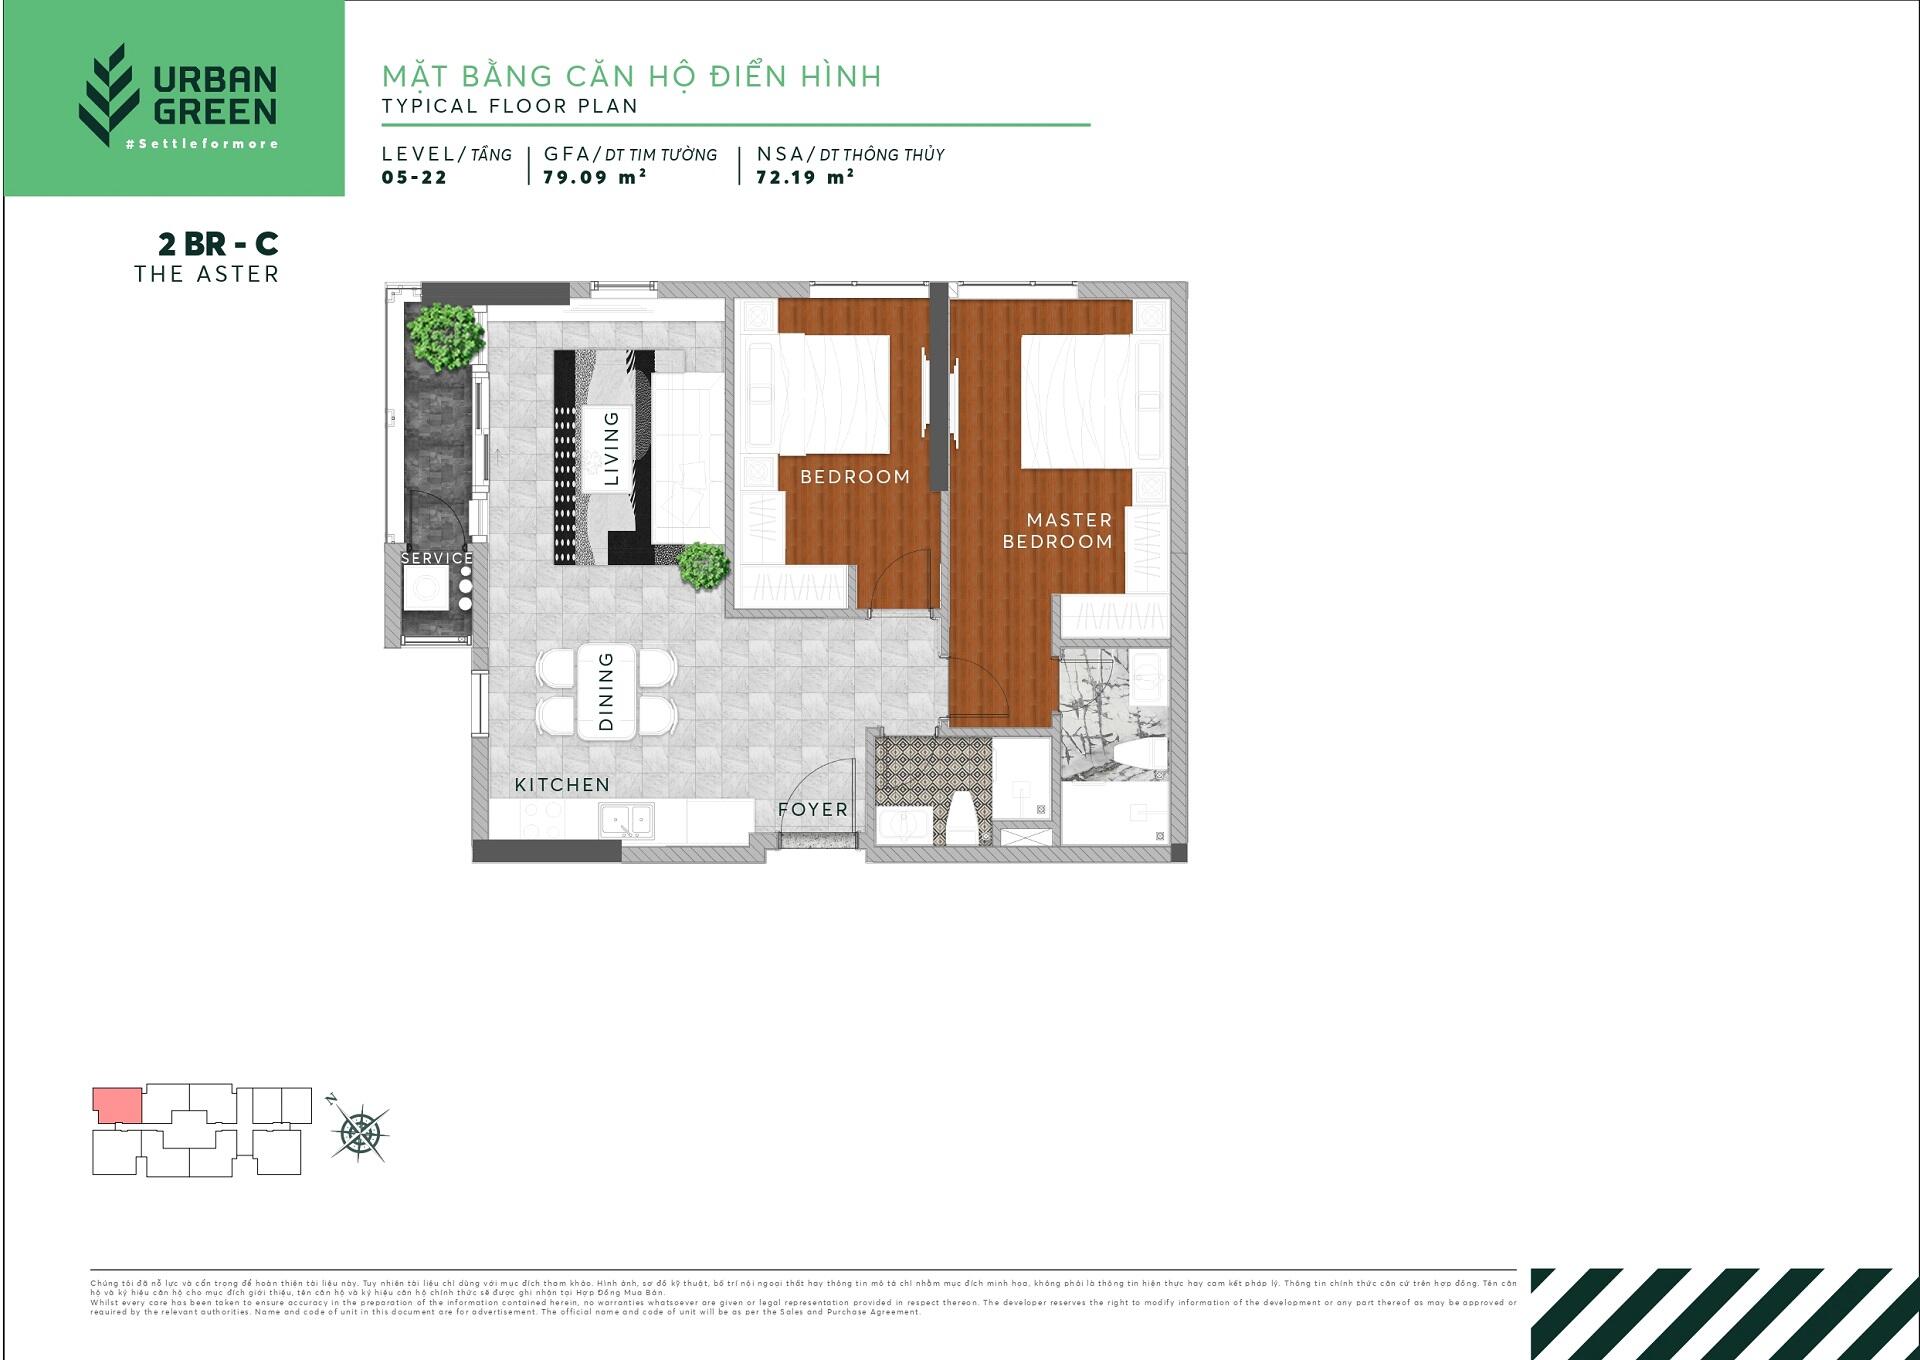 The layout of 2 bedroom apartment 2BR - C